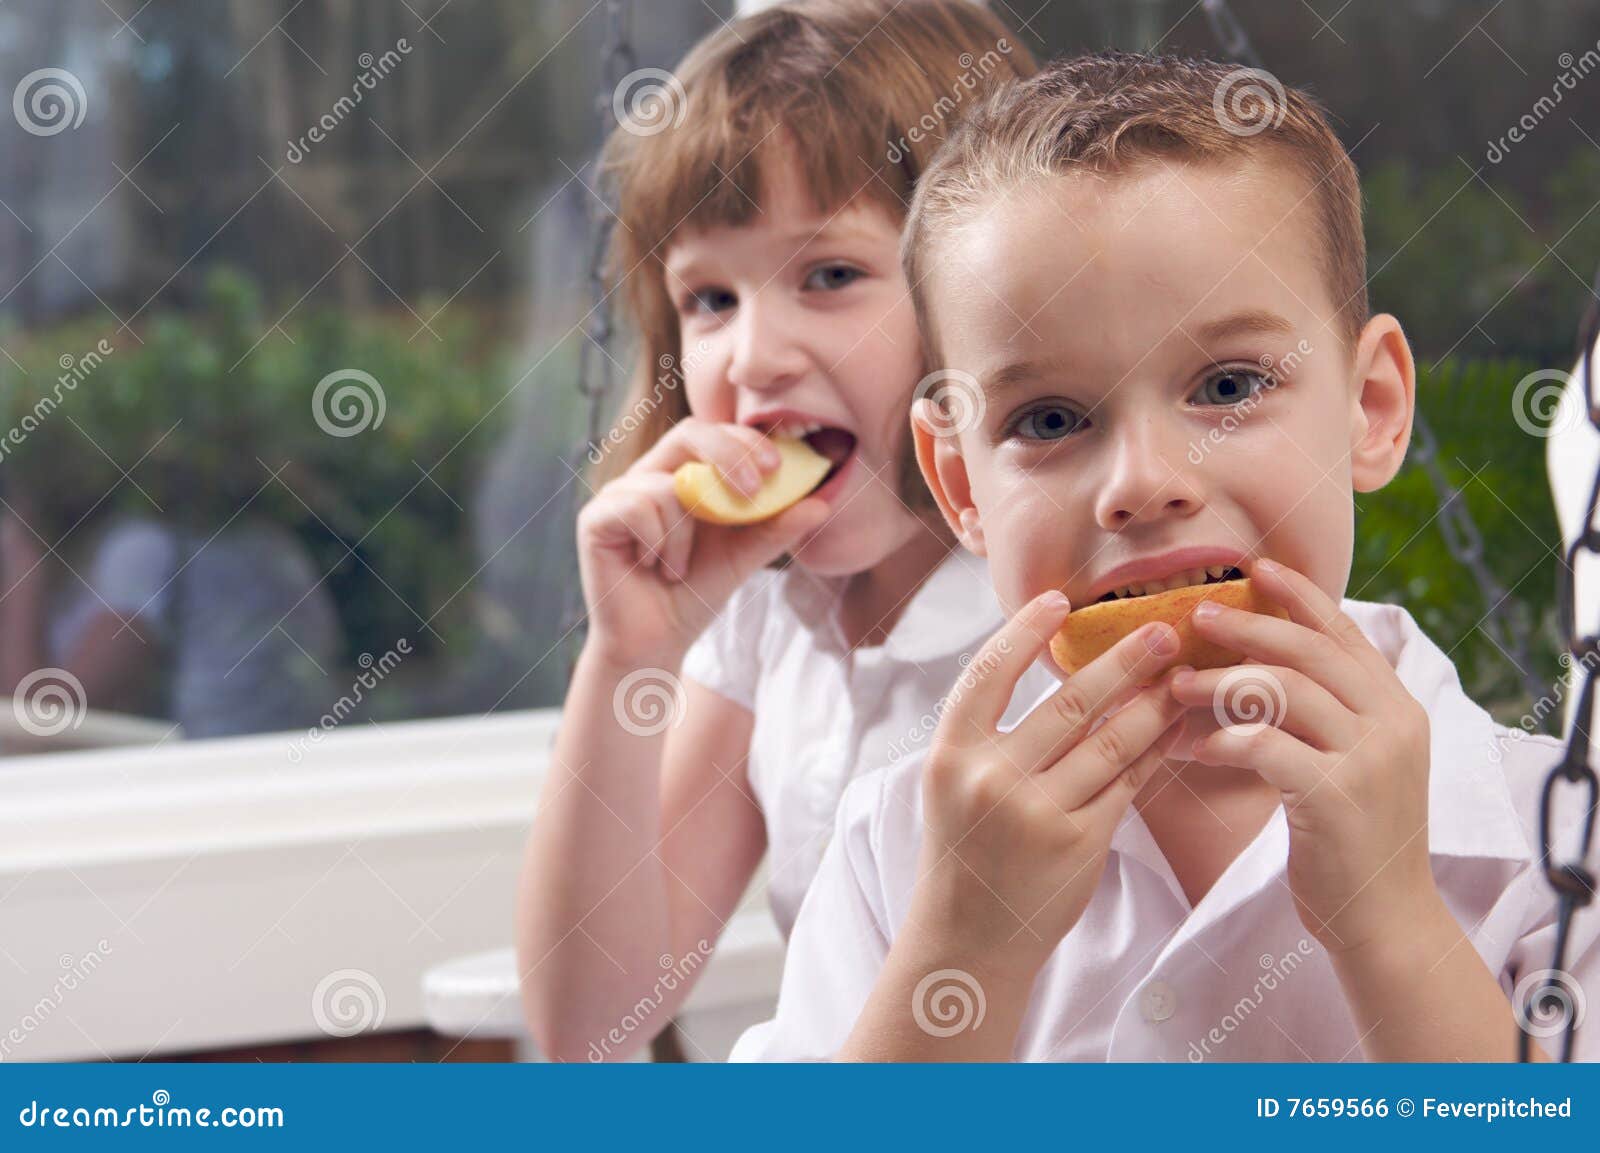 Girl With Little Brother Stock Images - Image: 32228104